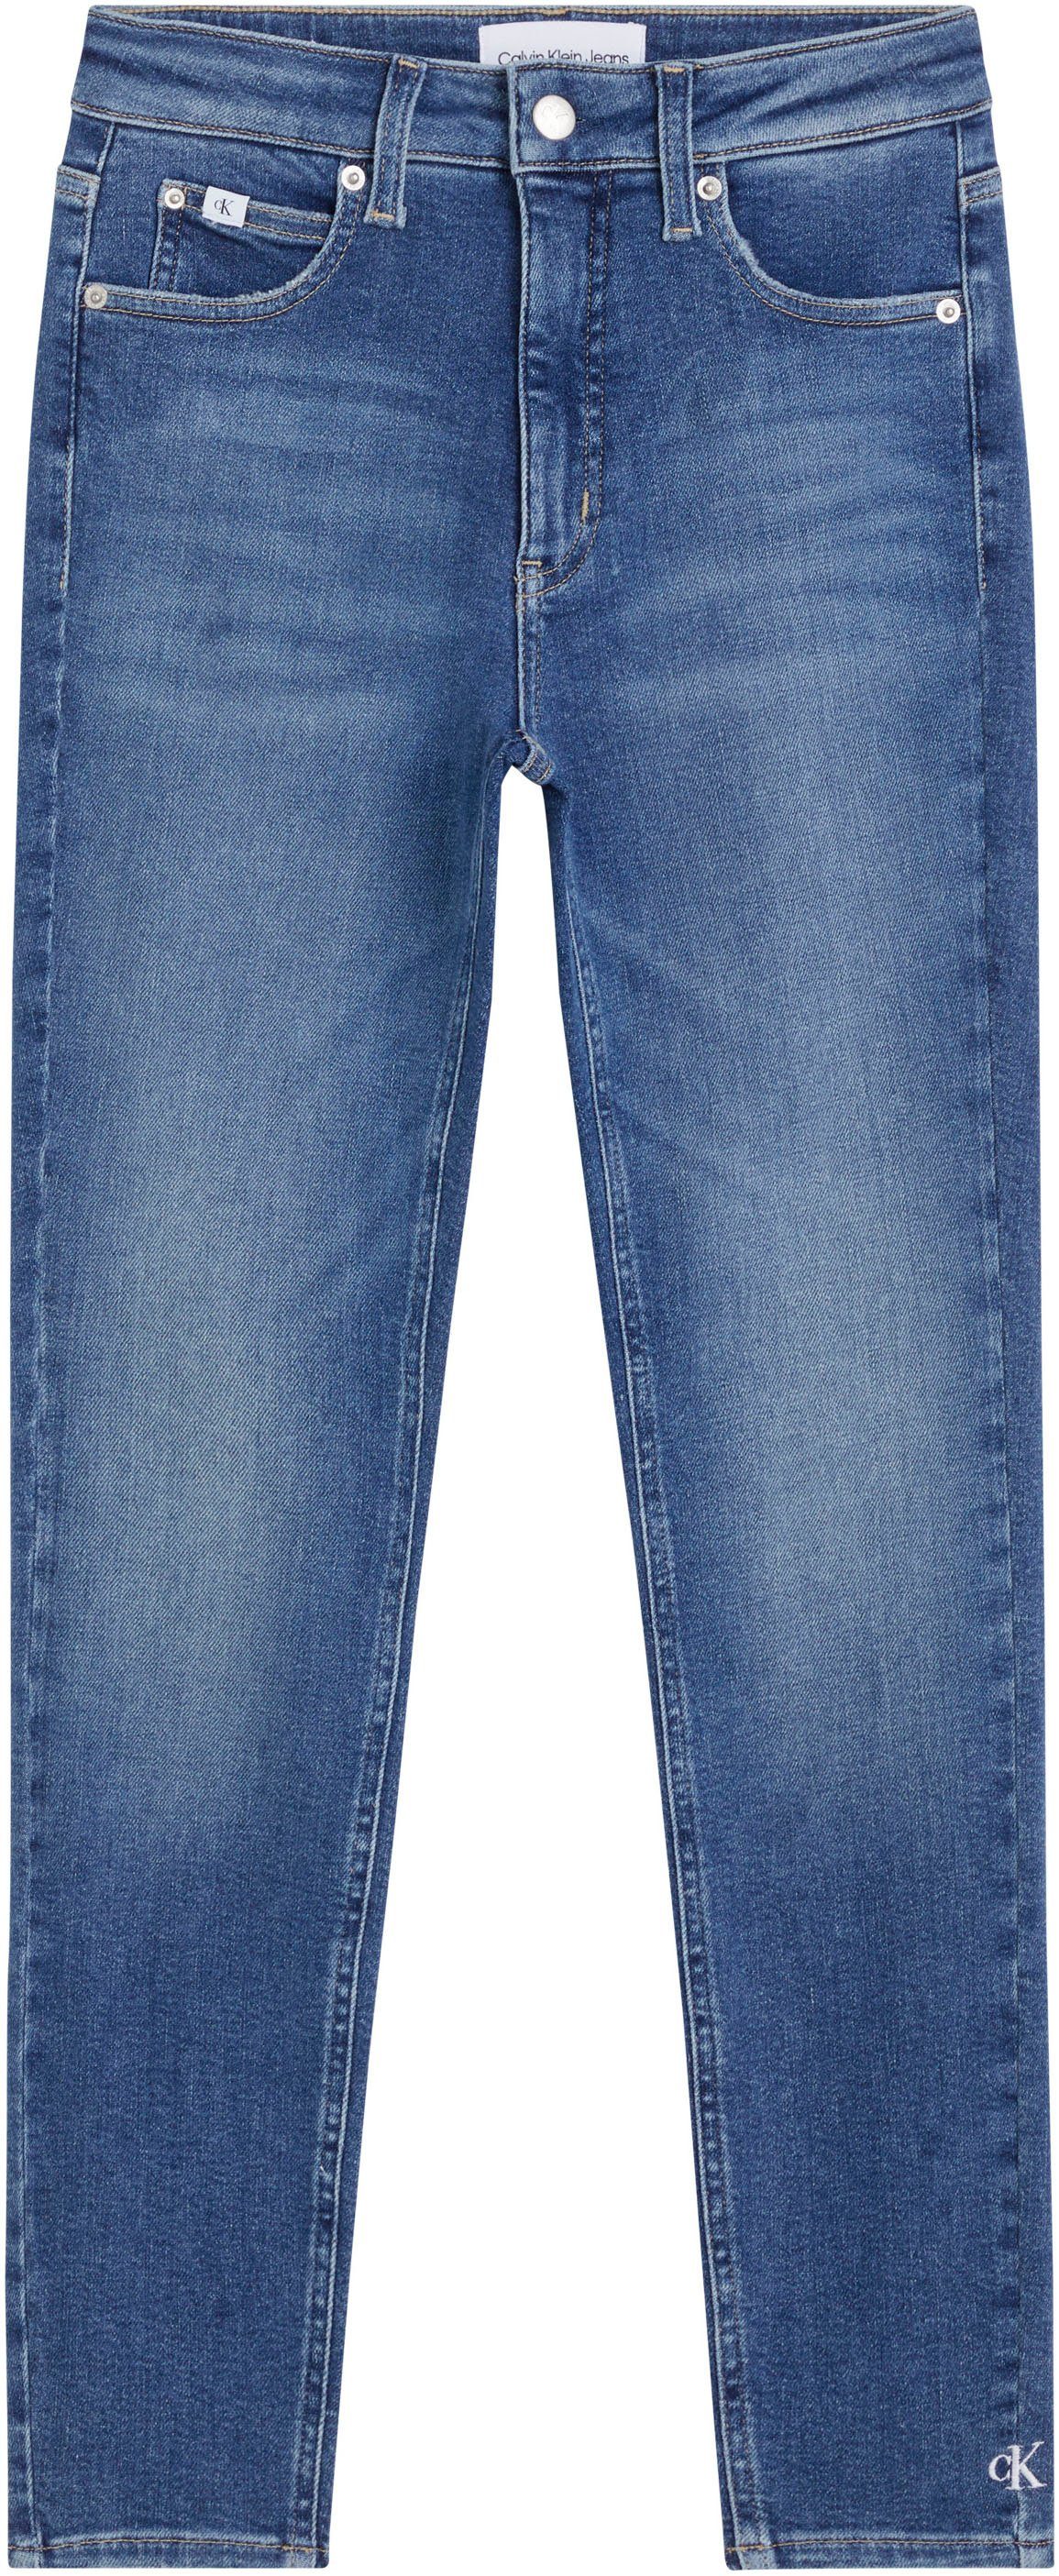 Calvin Klein Jeans SUPER HIGH ANKLE Ankle-Jeans RISE SKINNY